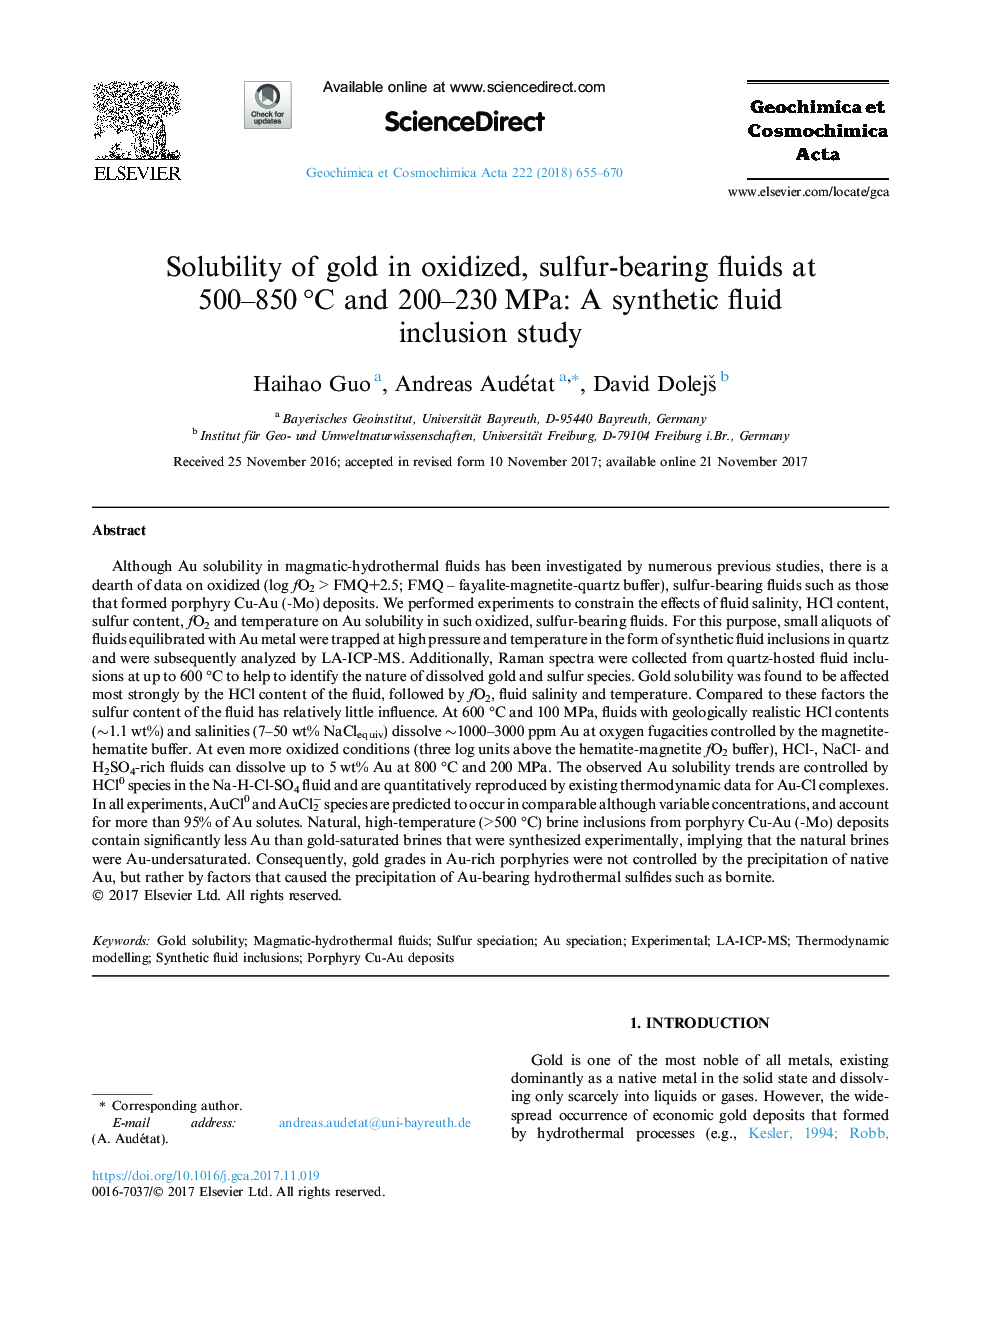 Solubility of gold in oxidized, sulfur-bearing fluids at 500-850â¯Â°C and 200-230â¯MPa: A synthetic fluid inclusion study